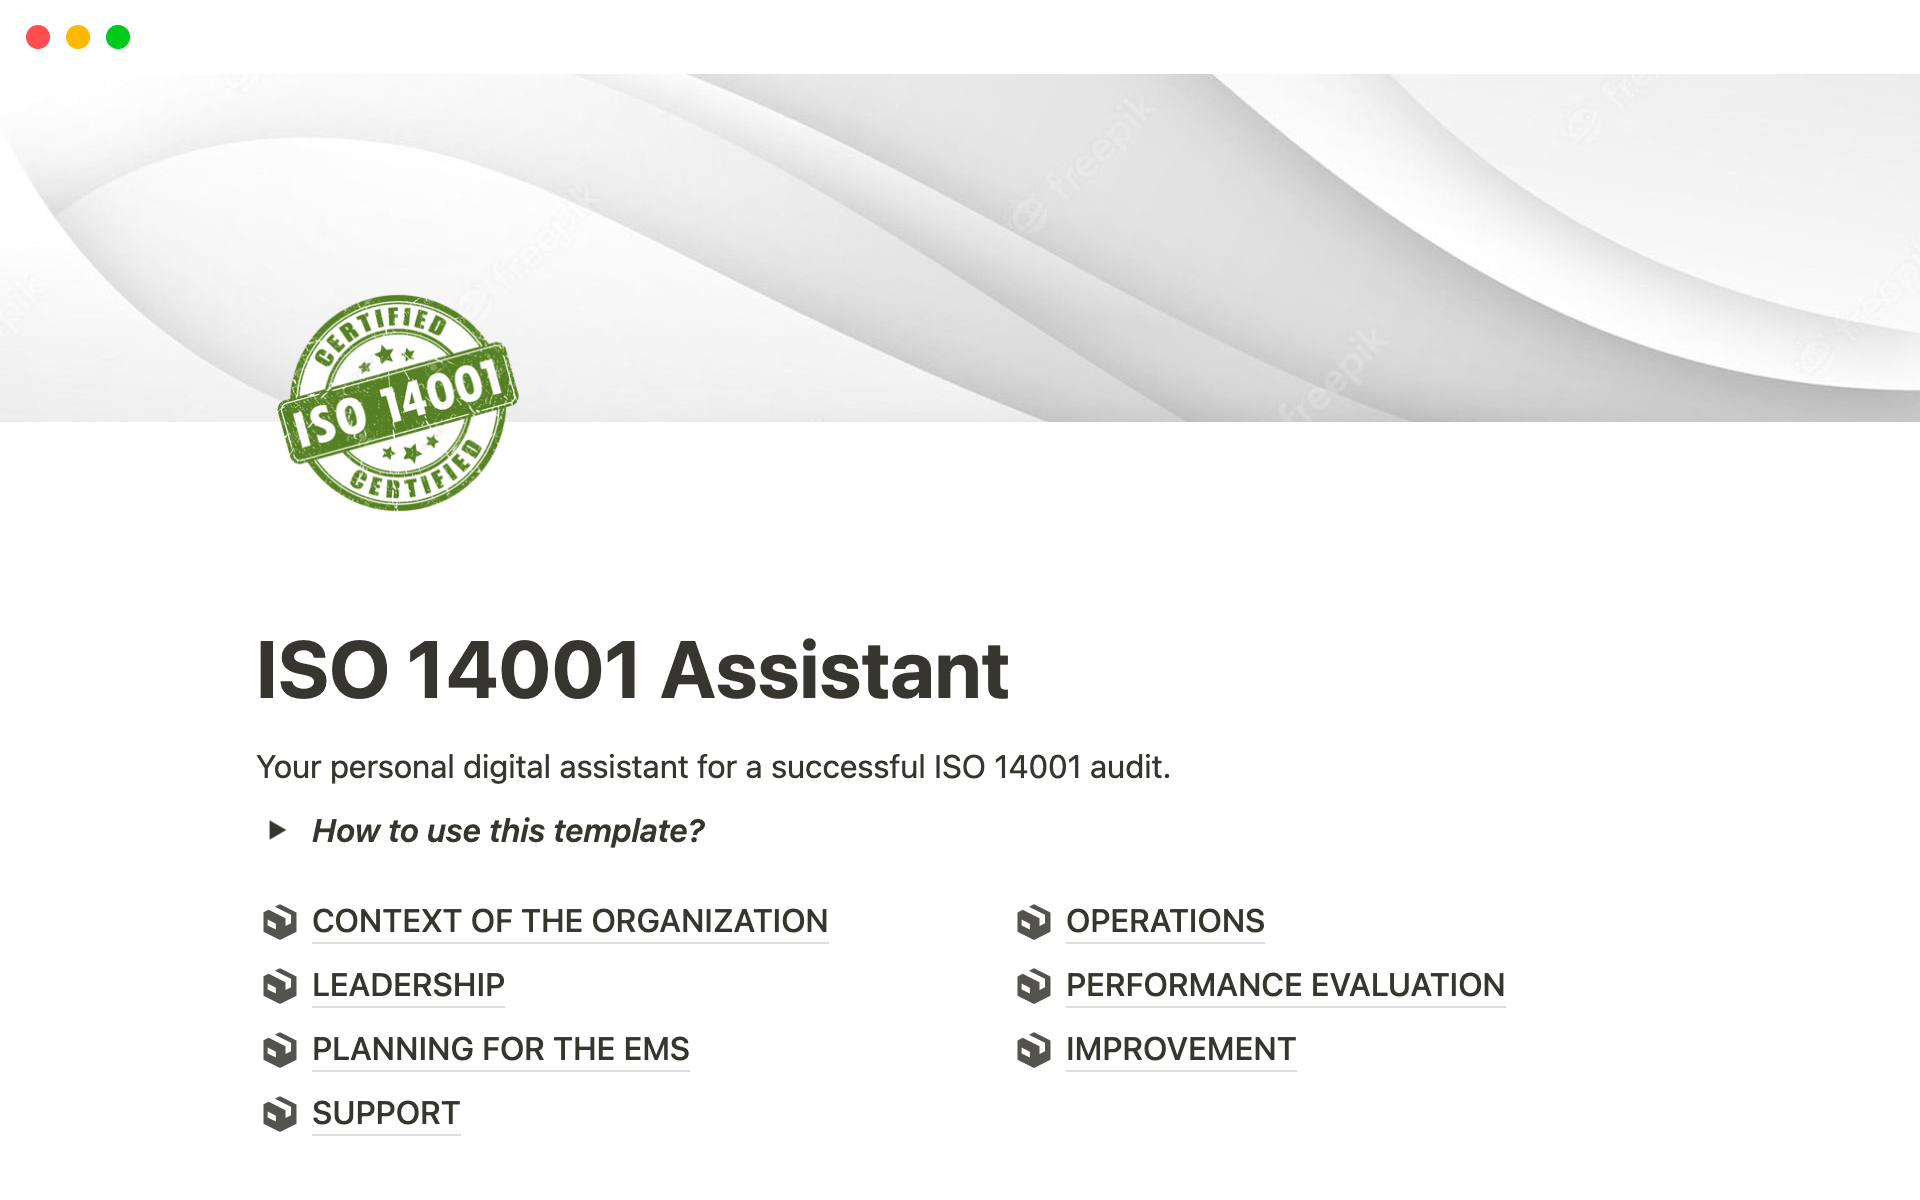 The ISO 14001 assistant is intended for persons in charge of preparing regular audits and recertification of standards.